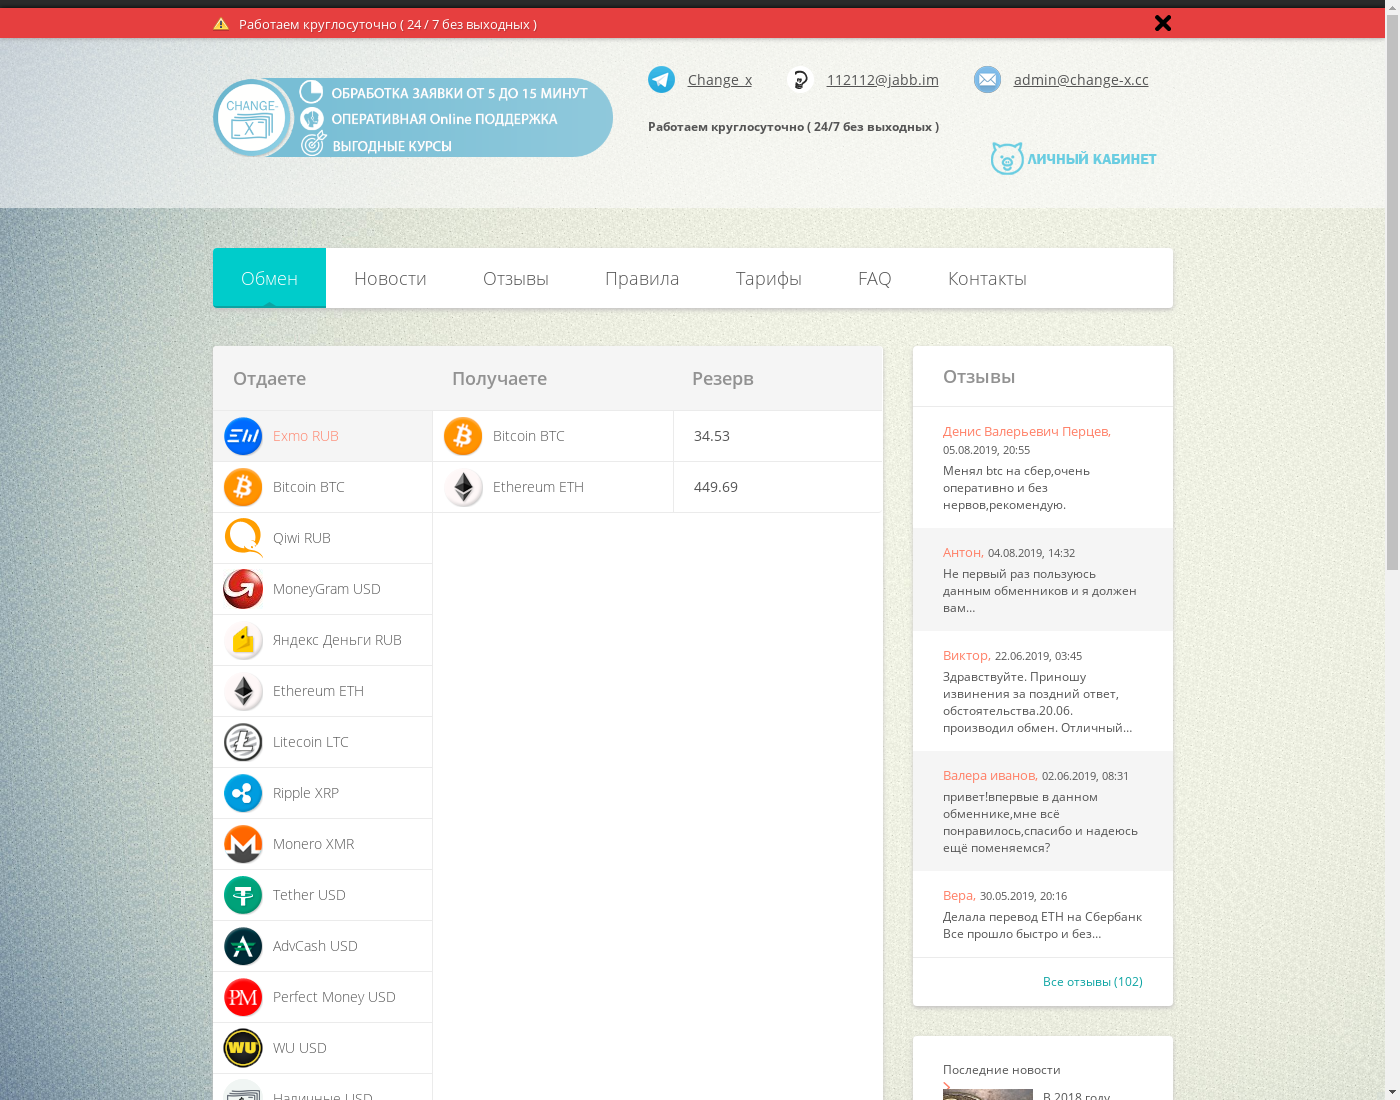 change-x user interface: the home page in English